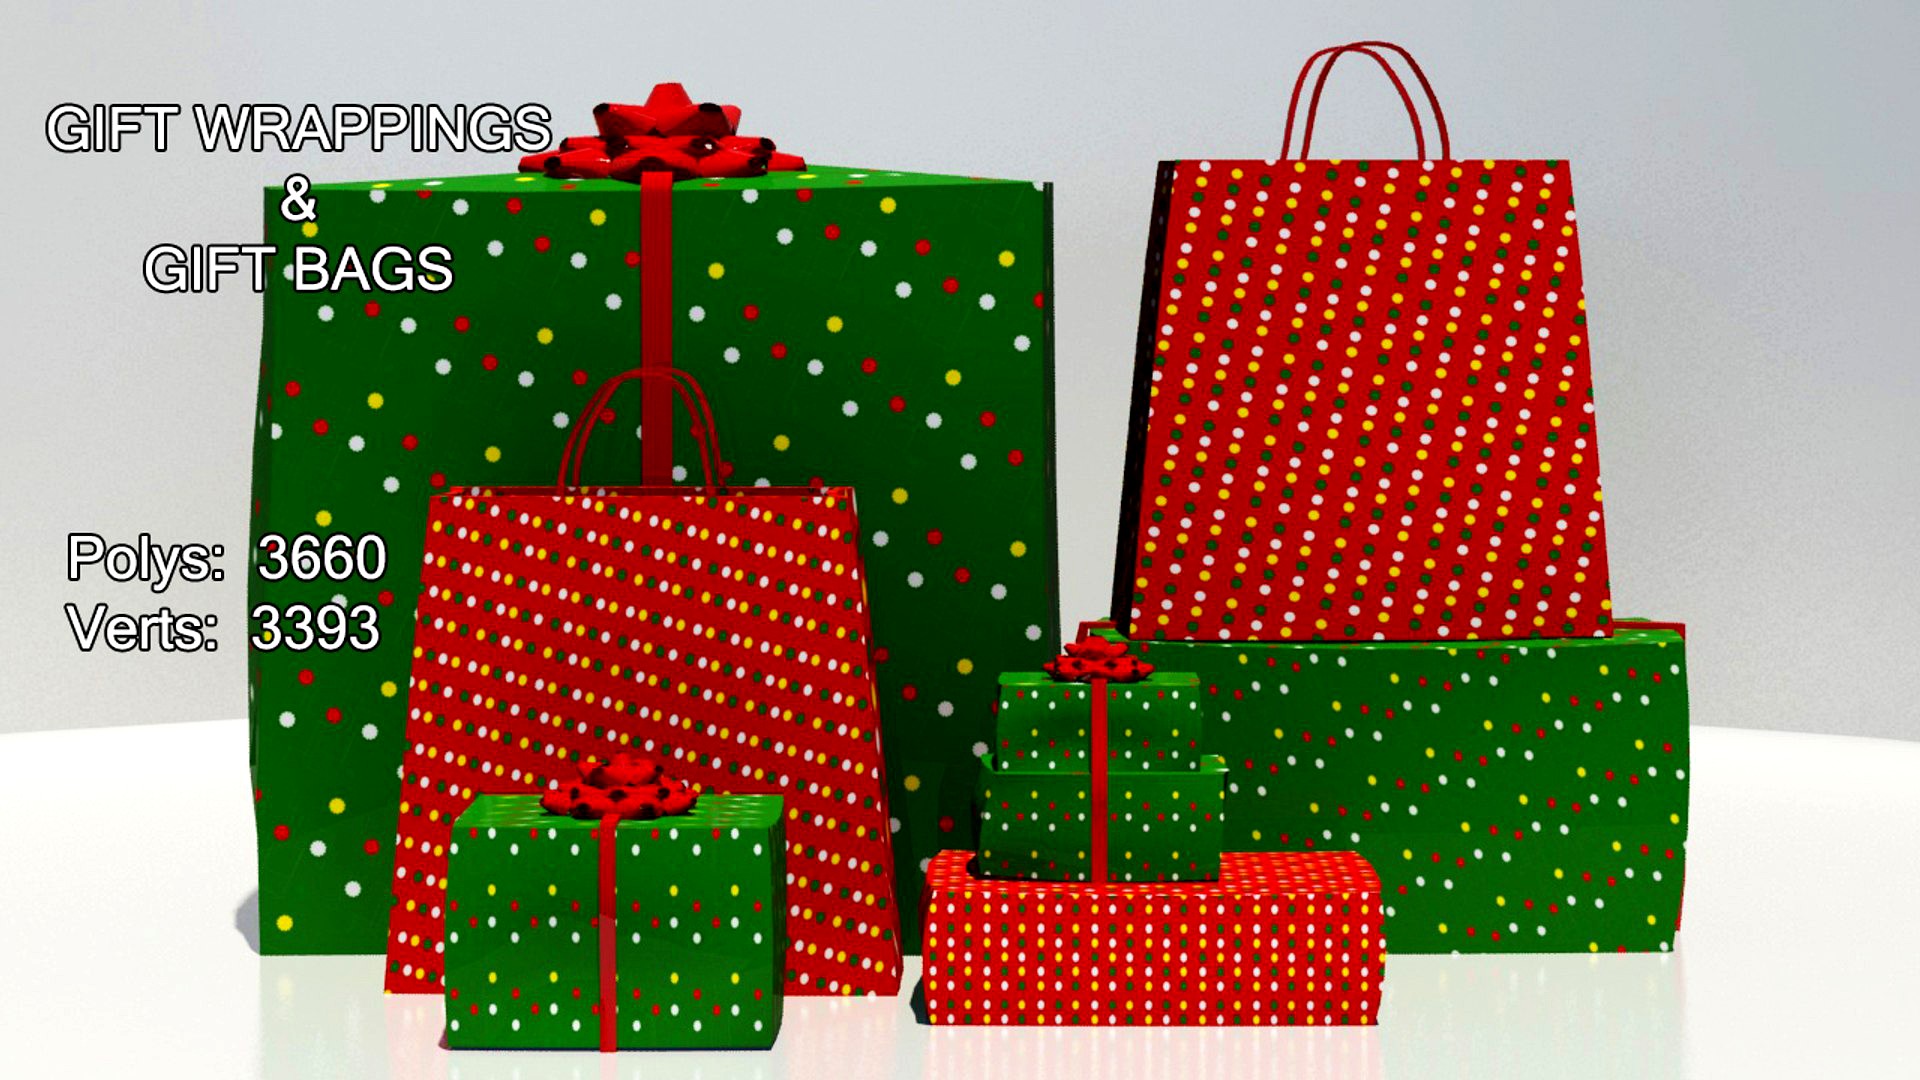 Gifts and gift bags